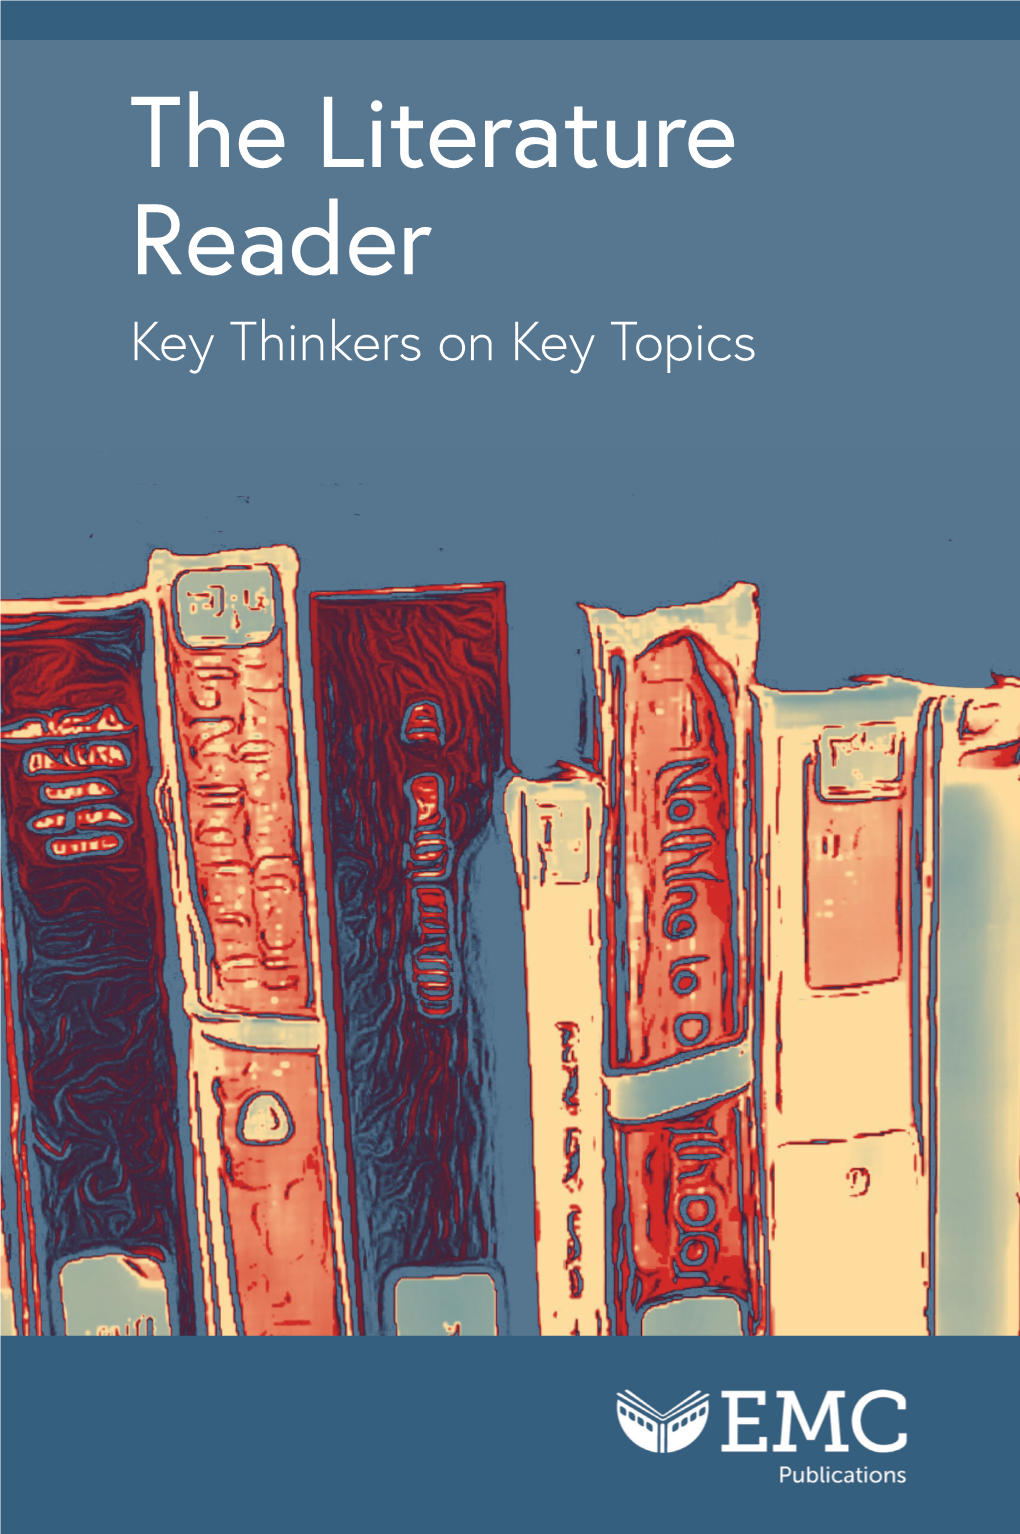 Ure the Literature Reader Reader the Literature Reader – Key Thinkers on Key Topics Key Thinkers on Key Topics Key Thinkers on Key Topics